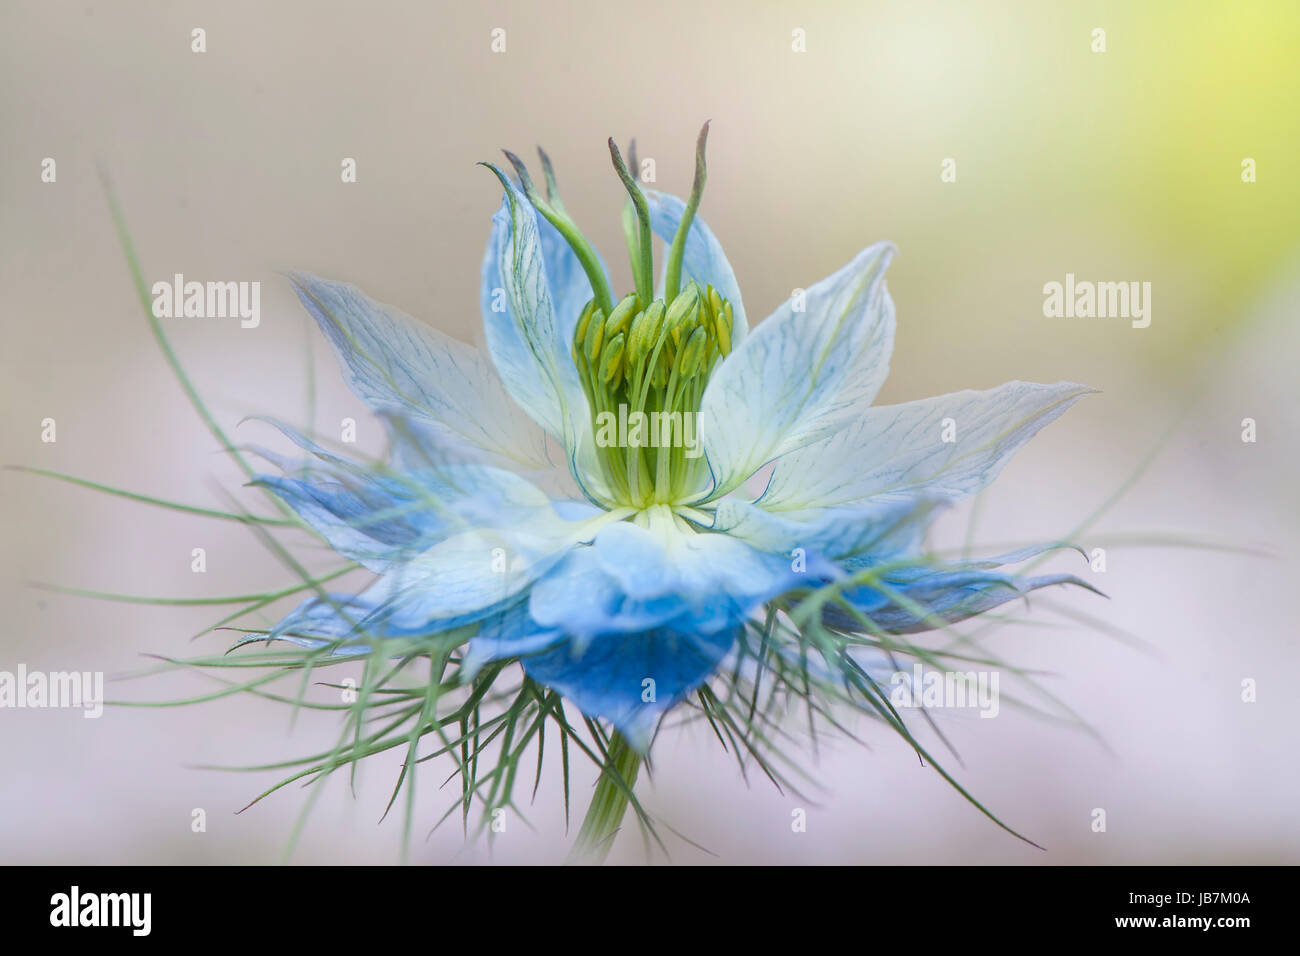 Close-up image of the delicate blue, Love-in-a-mist flower also known as Nigella damascena Stock Photo